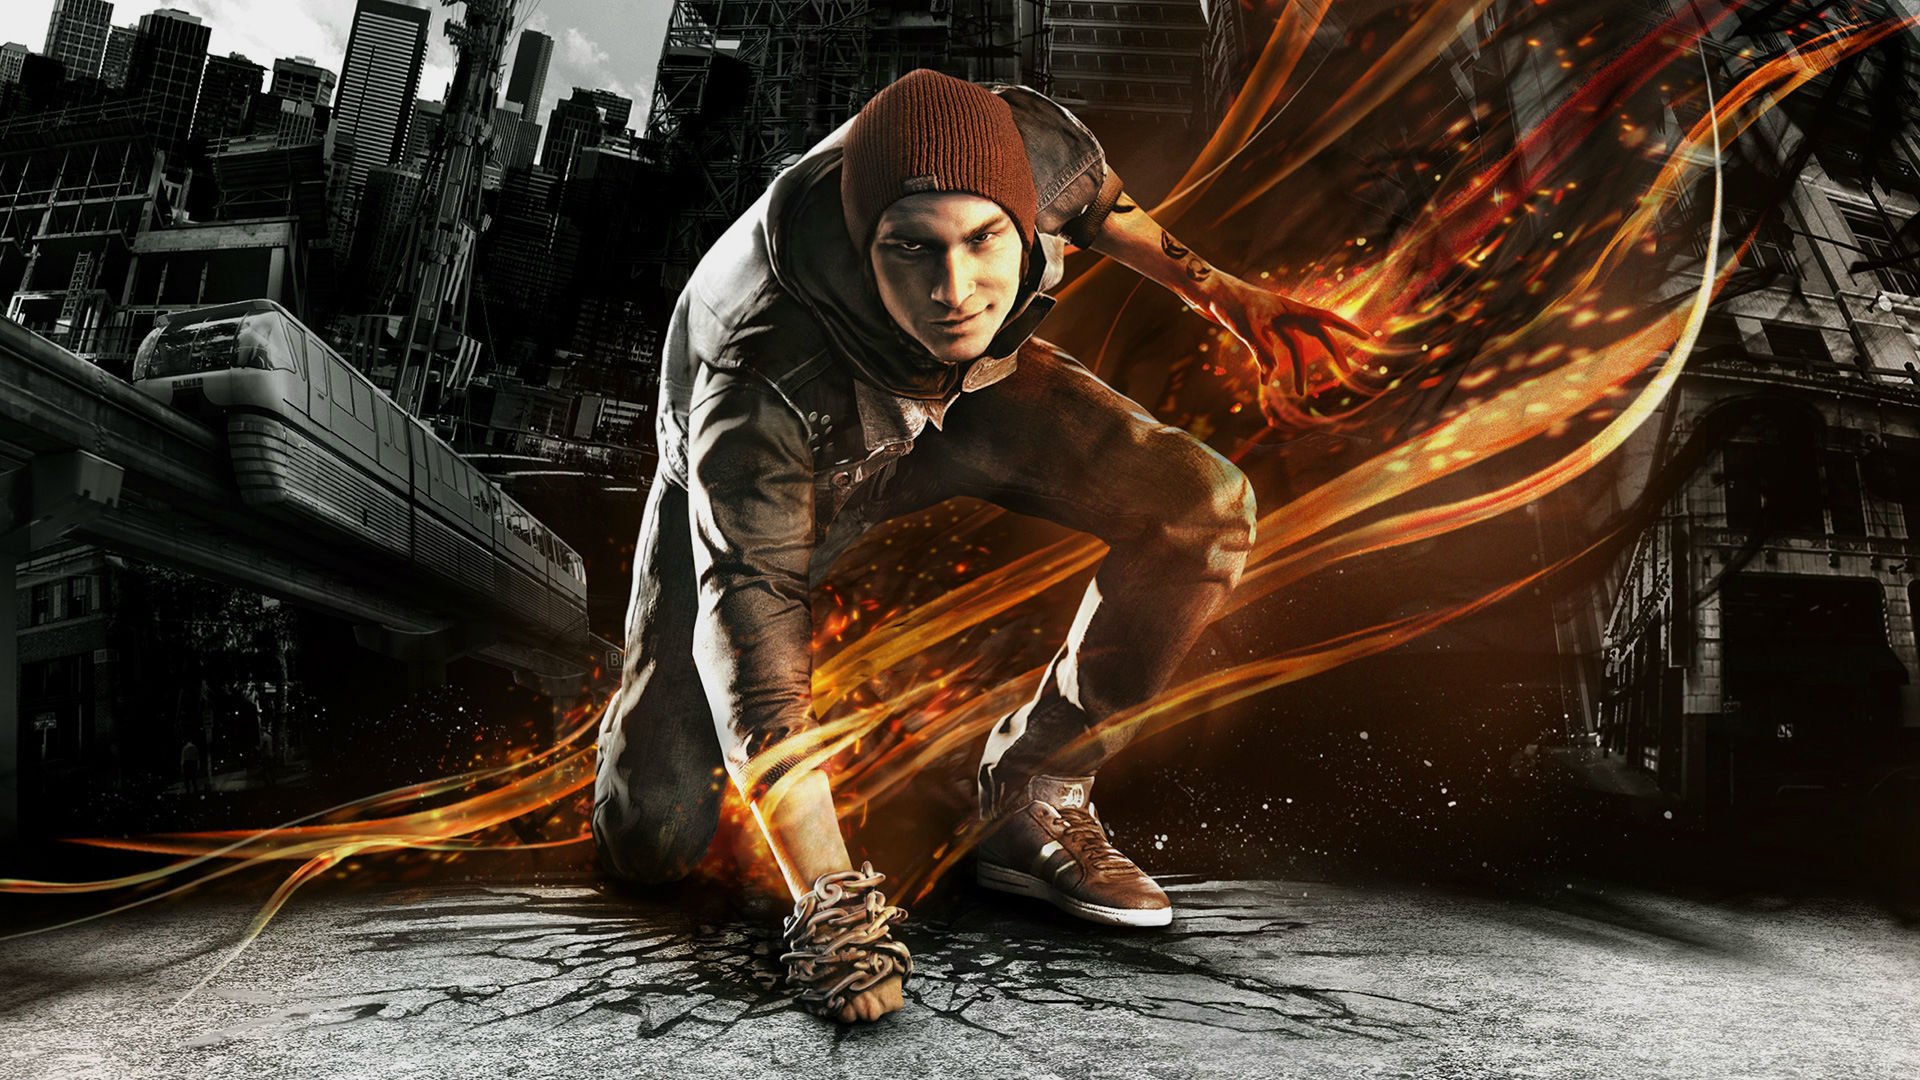 gaming superheroes Not DC or Marvel - Delsin Rowe (inFamous: Second Son)